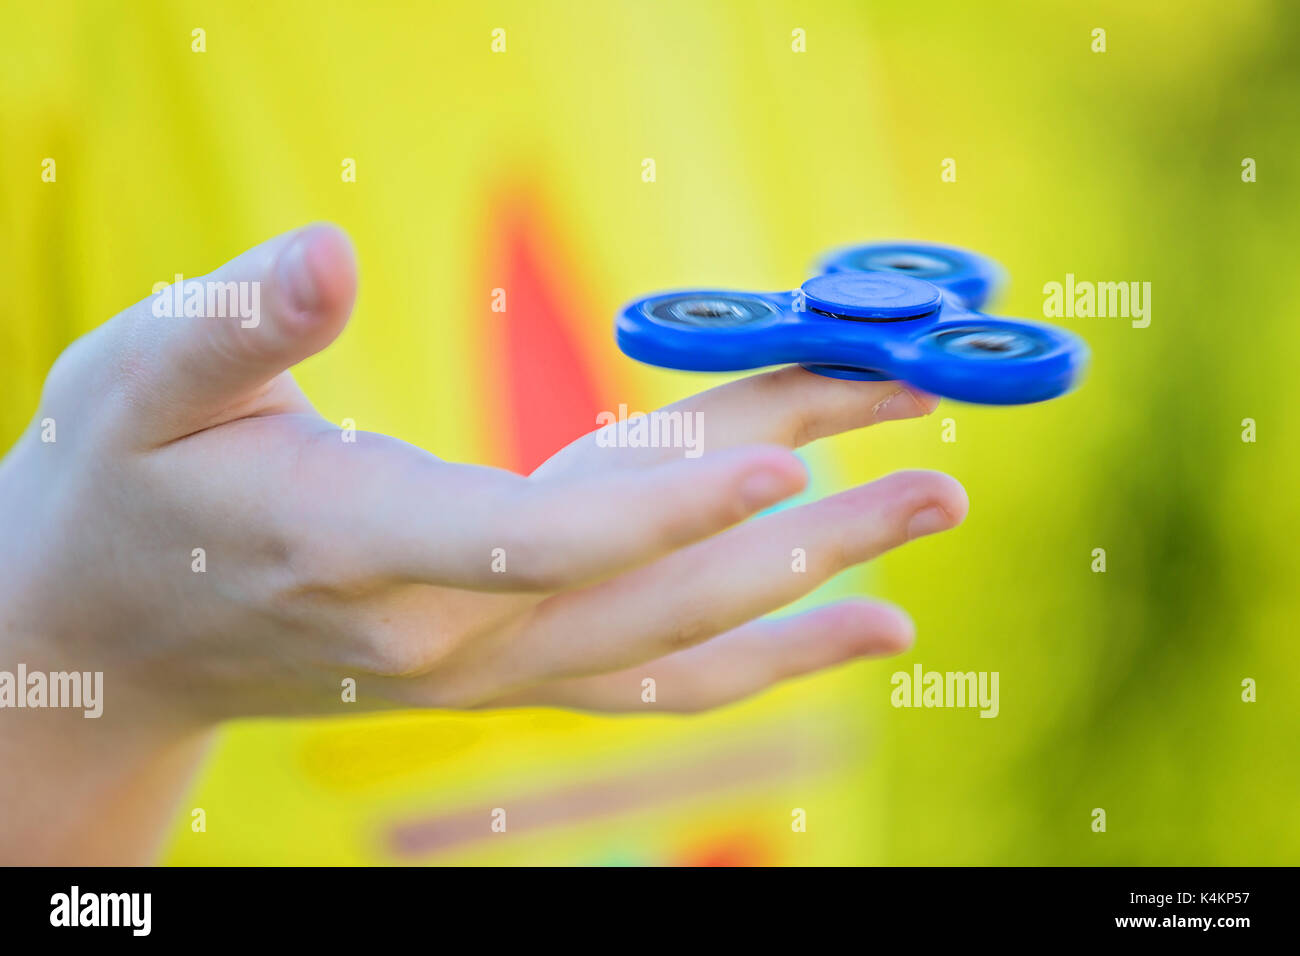 Girl's hand holding a spinning fidget spinner in her hand, spinning them on her index finger Stock Photo